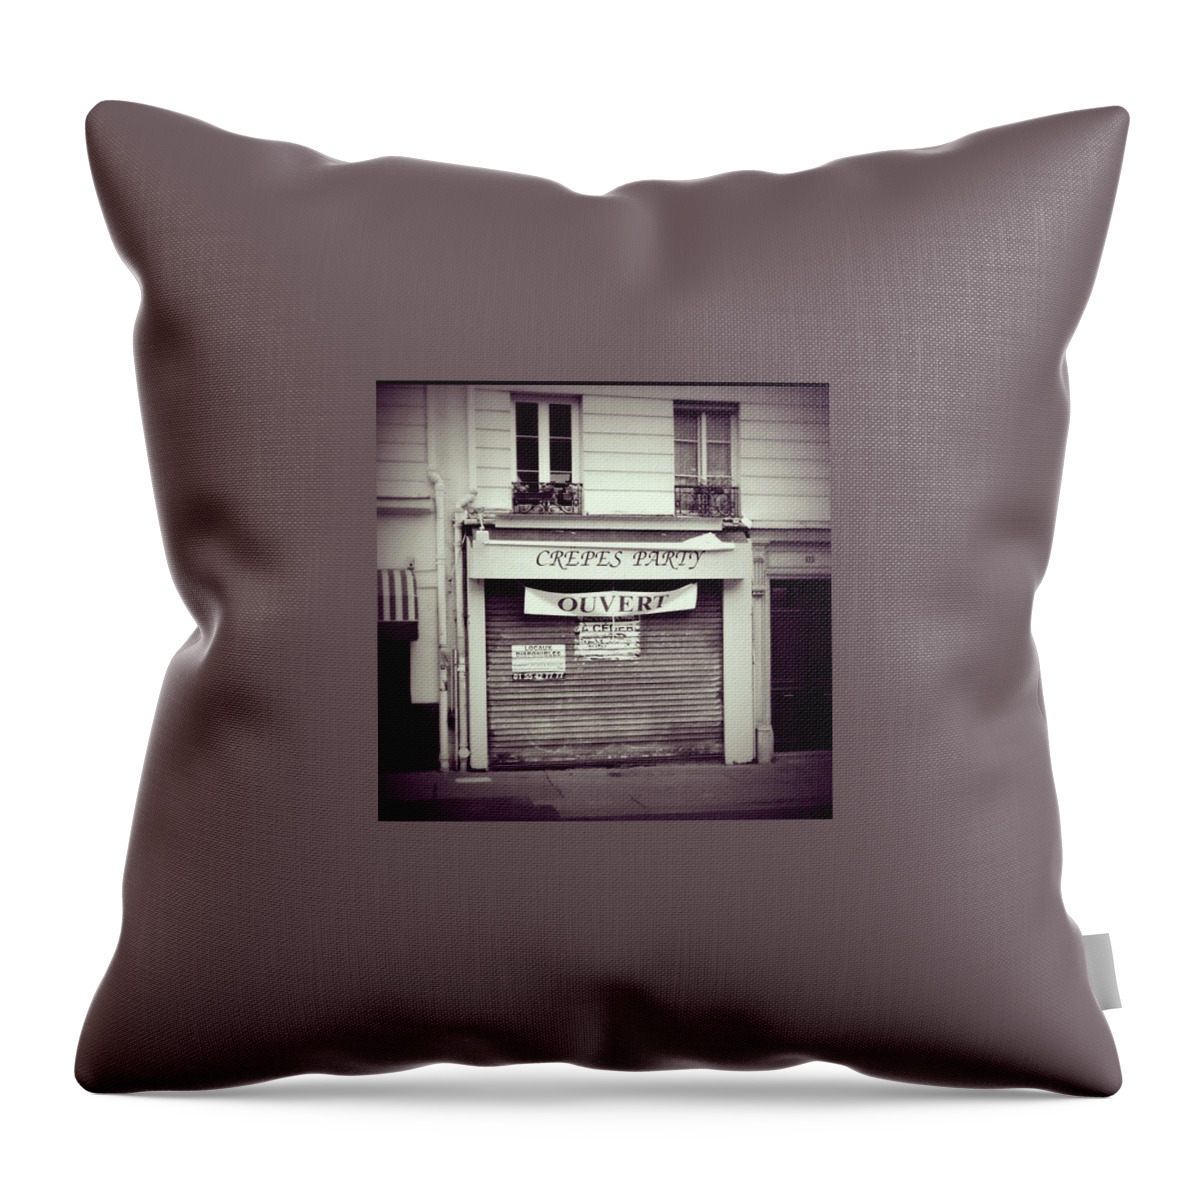 Europe Throw Pillow featuring the photograph Paris by Juric Mario